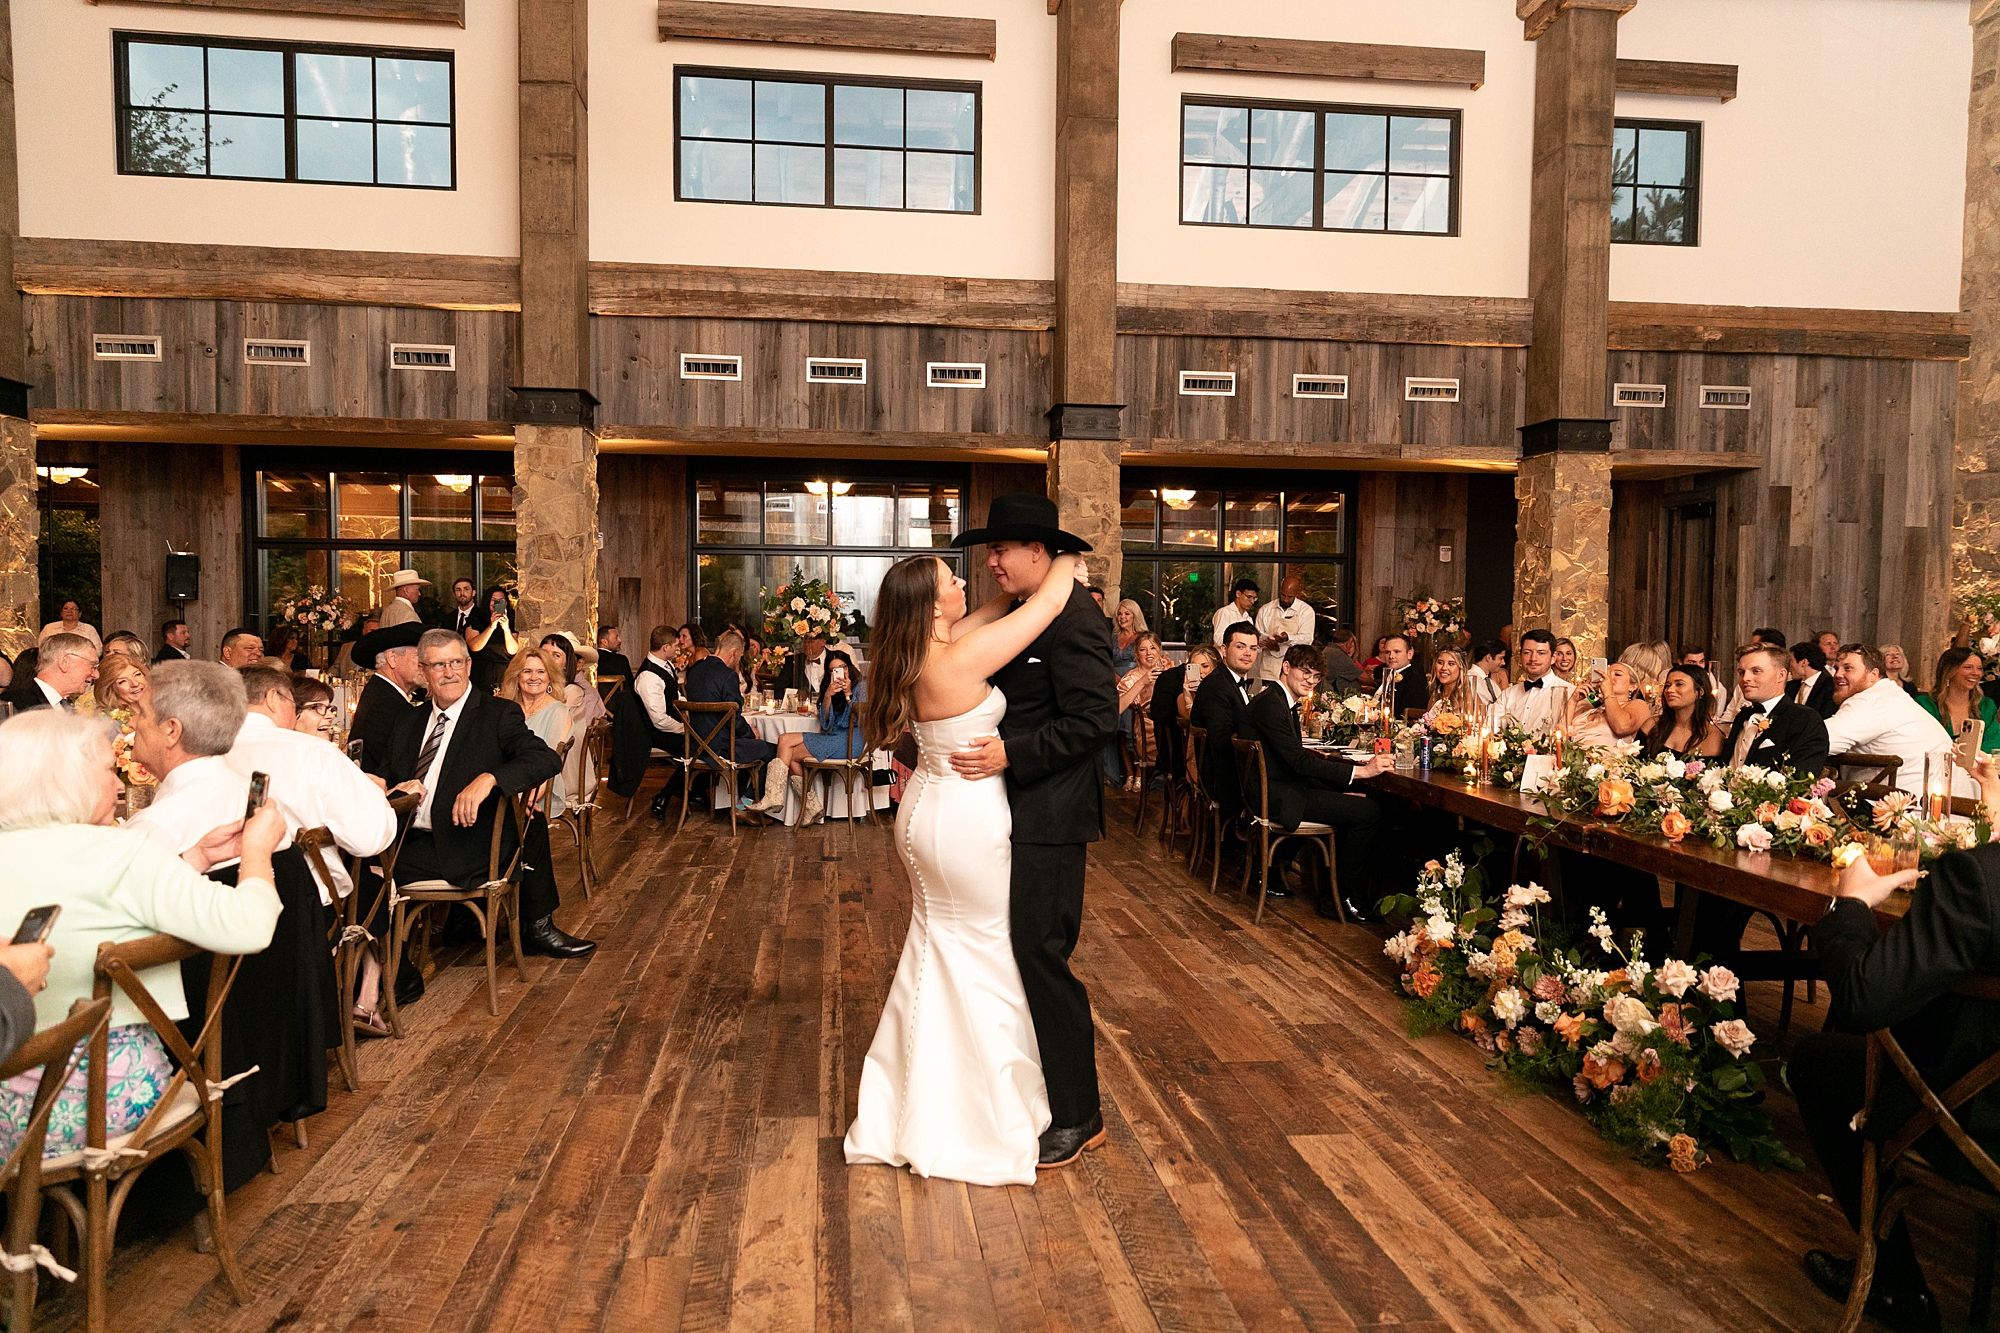 newlyweds have first dance during wedding reception in the barn at the Hotel Drover